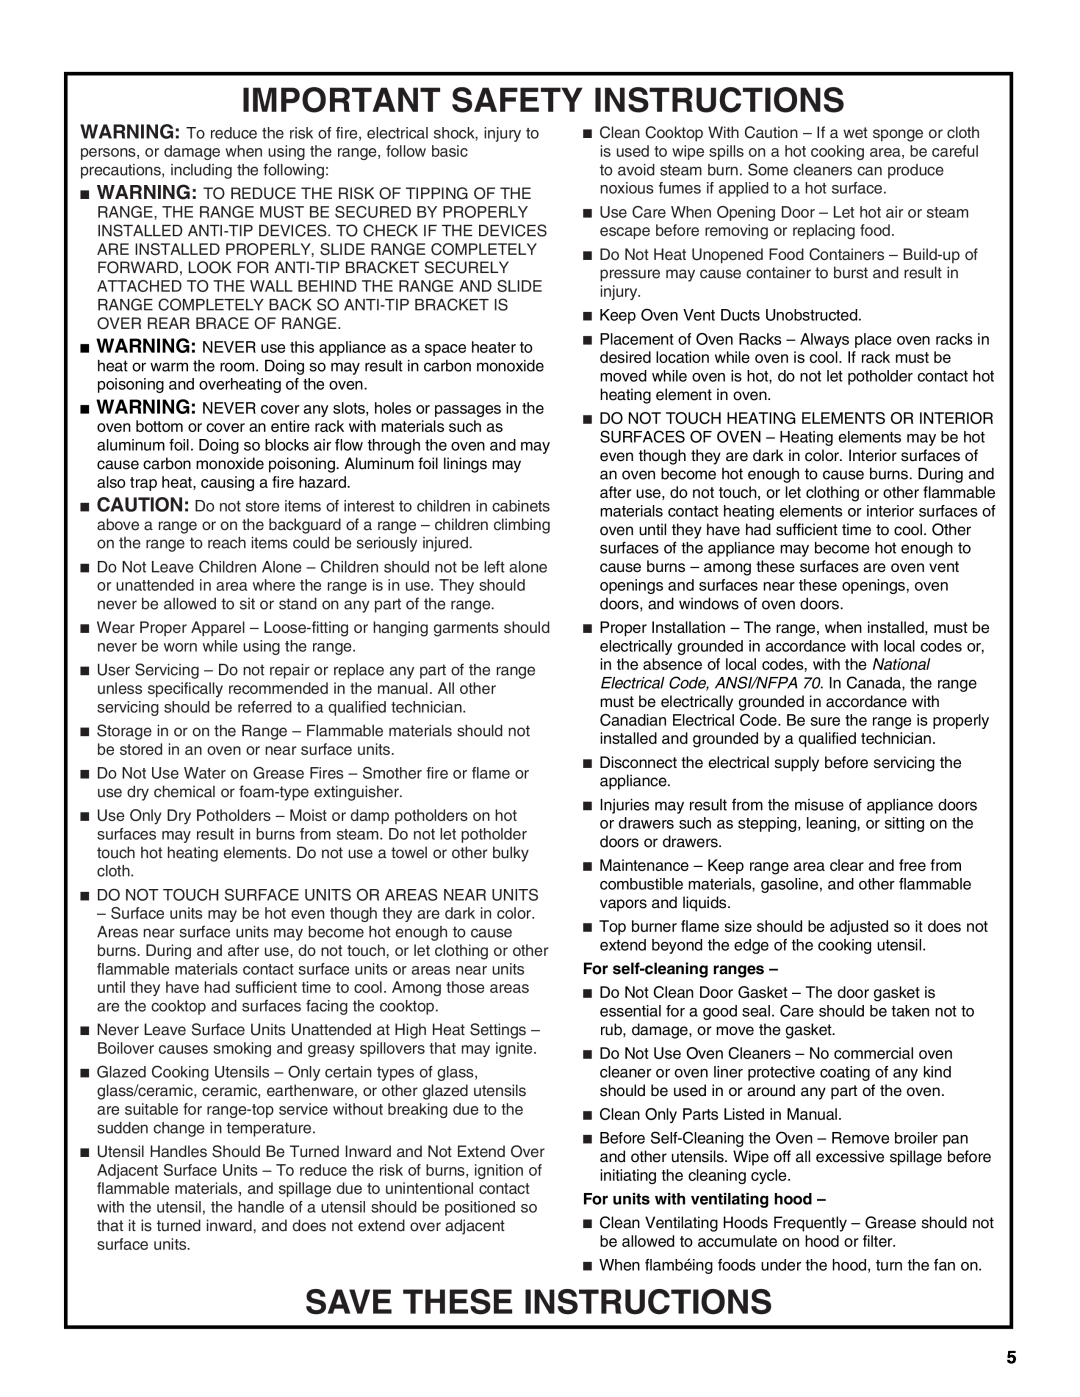 KitchenAid KDRS807 manual Important Safety Instructions, Save These Instructions, For self-cleaning ranges 